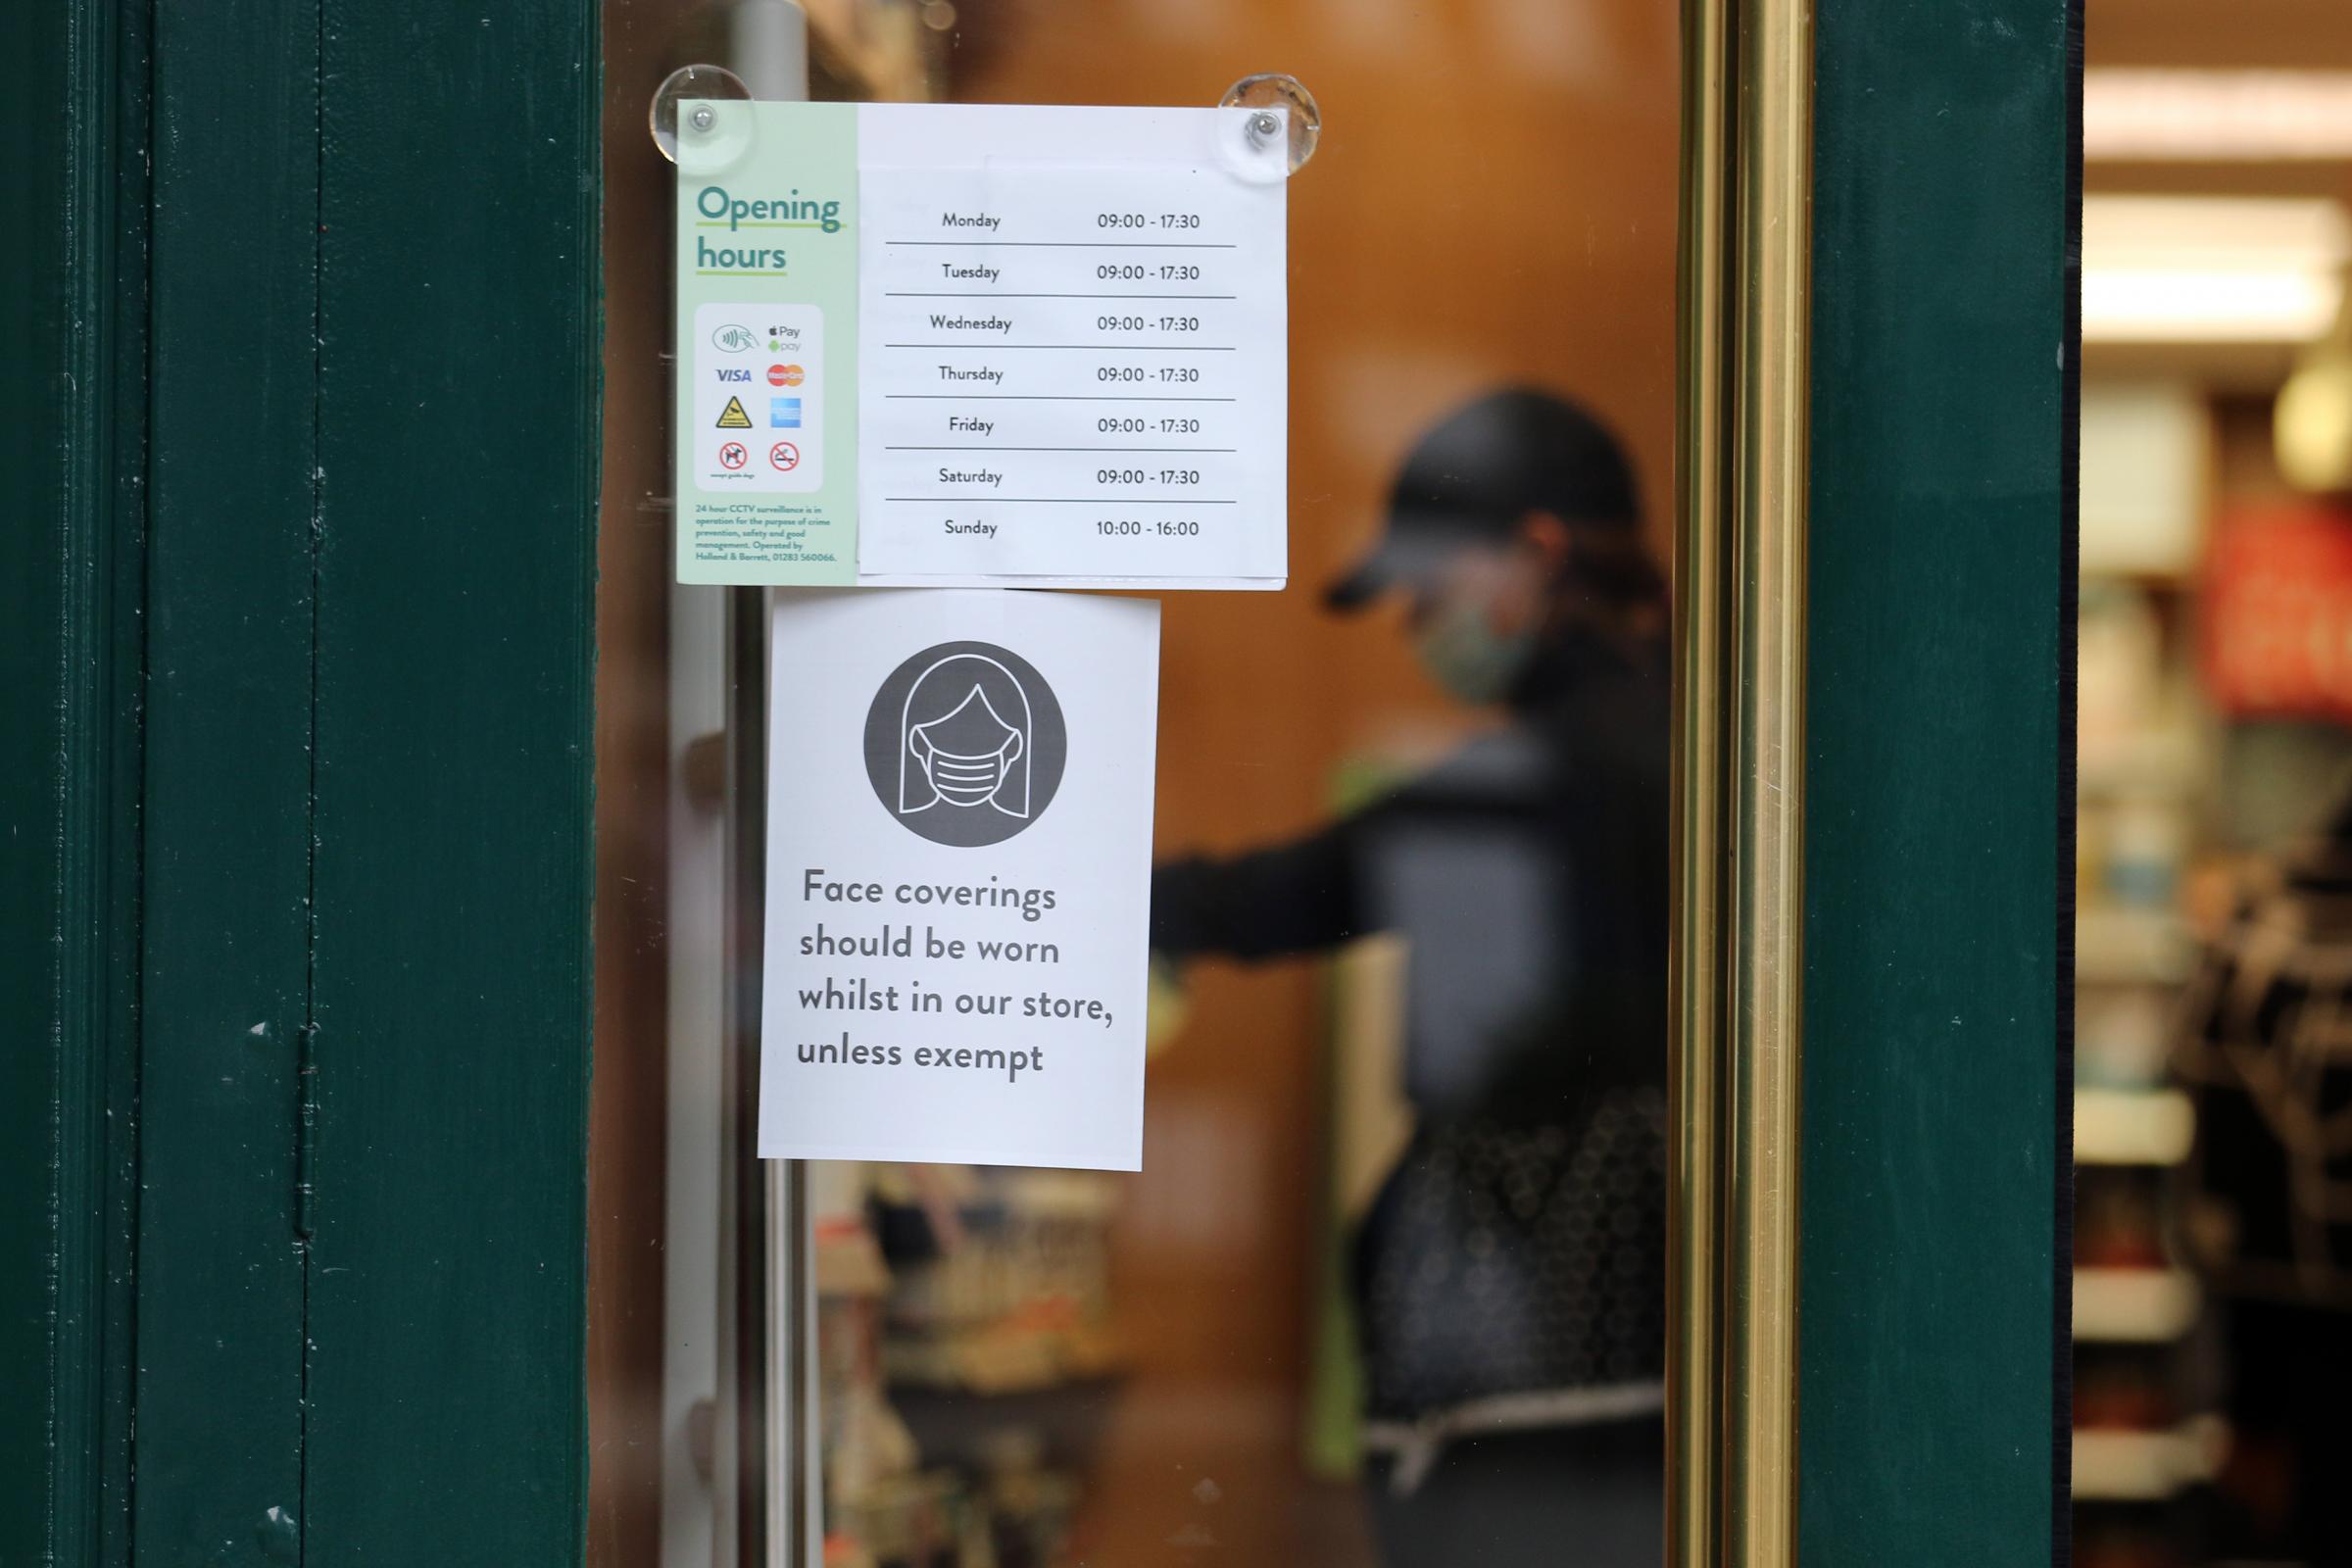 Signs have appeared in shop windows around Hereford following the government restrictions on wearing face masks in shops.